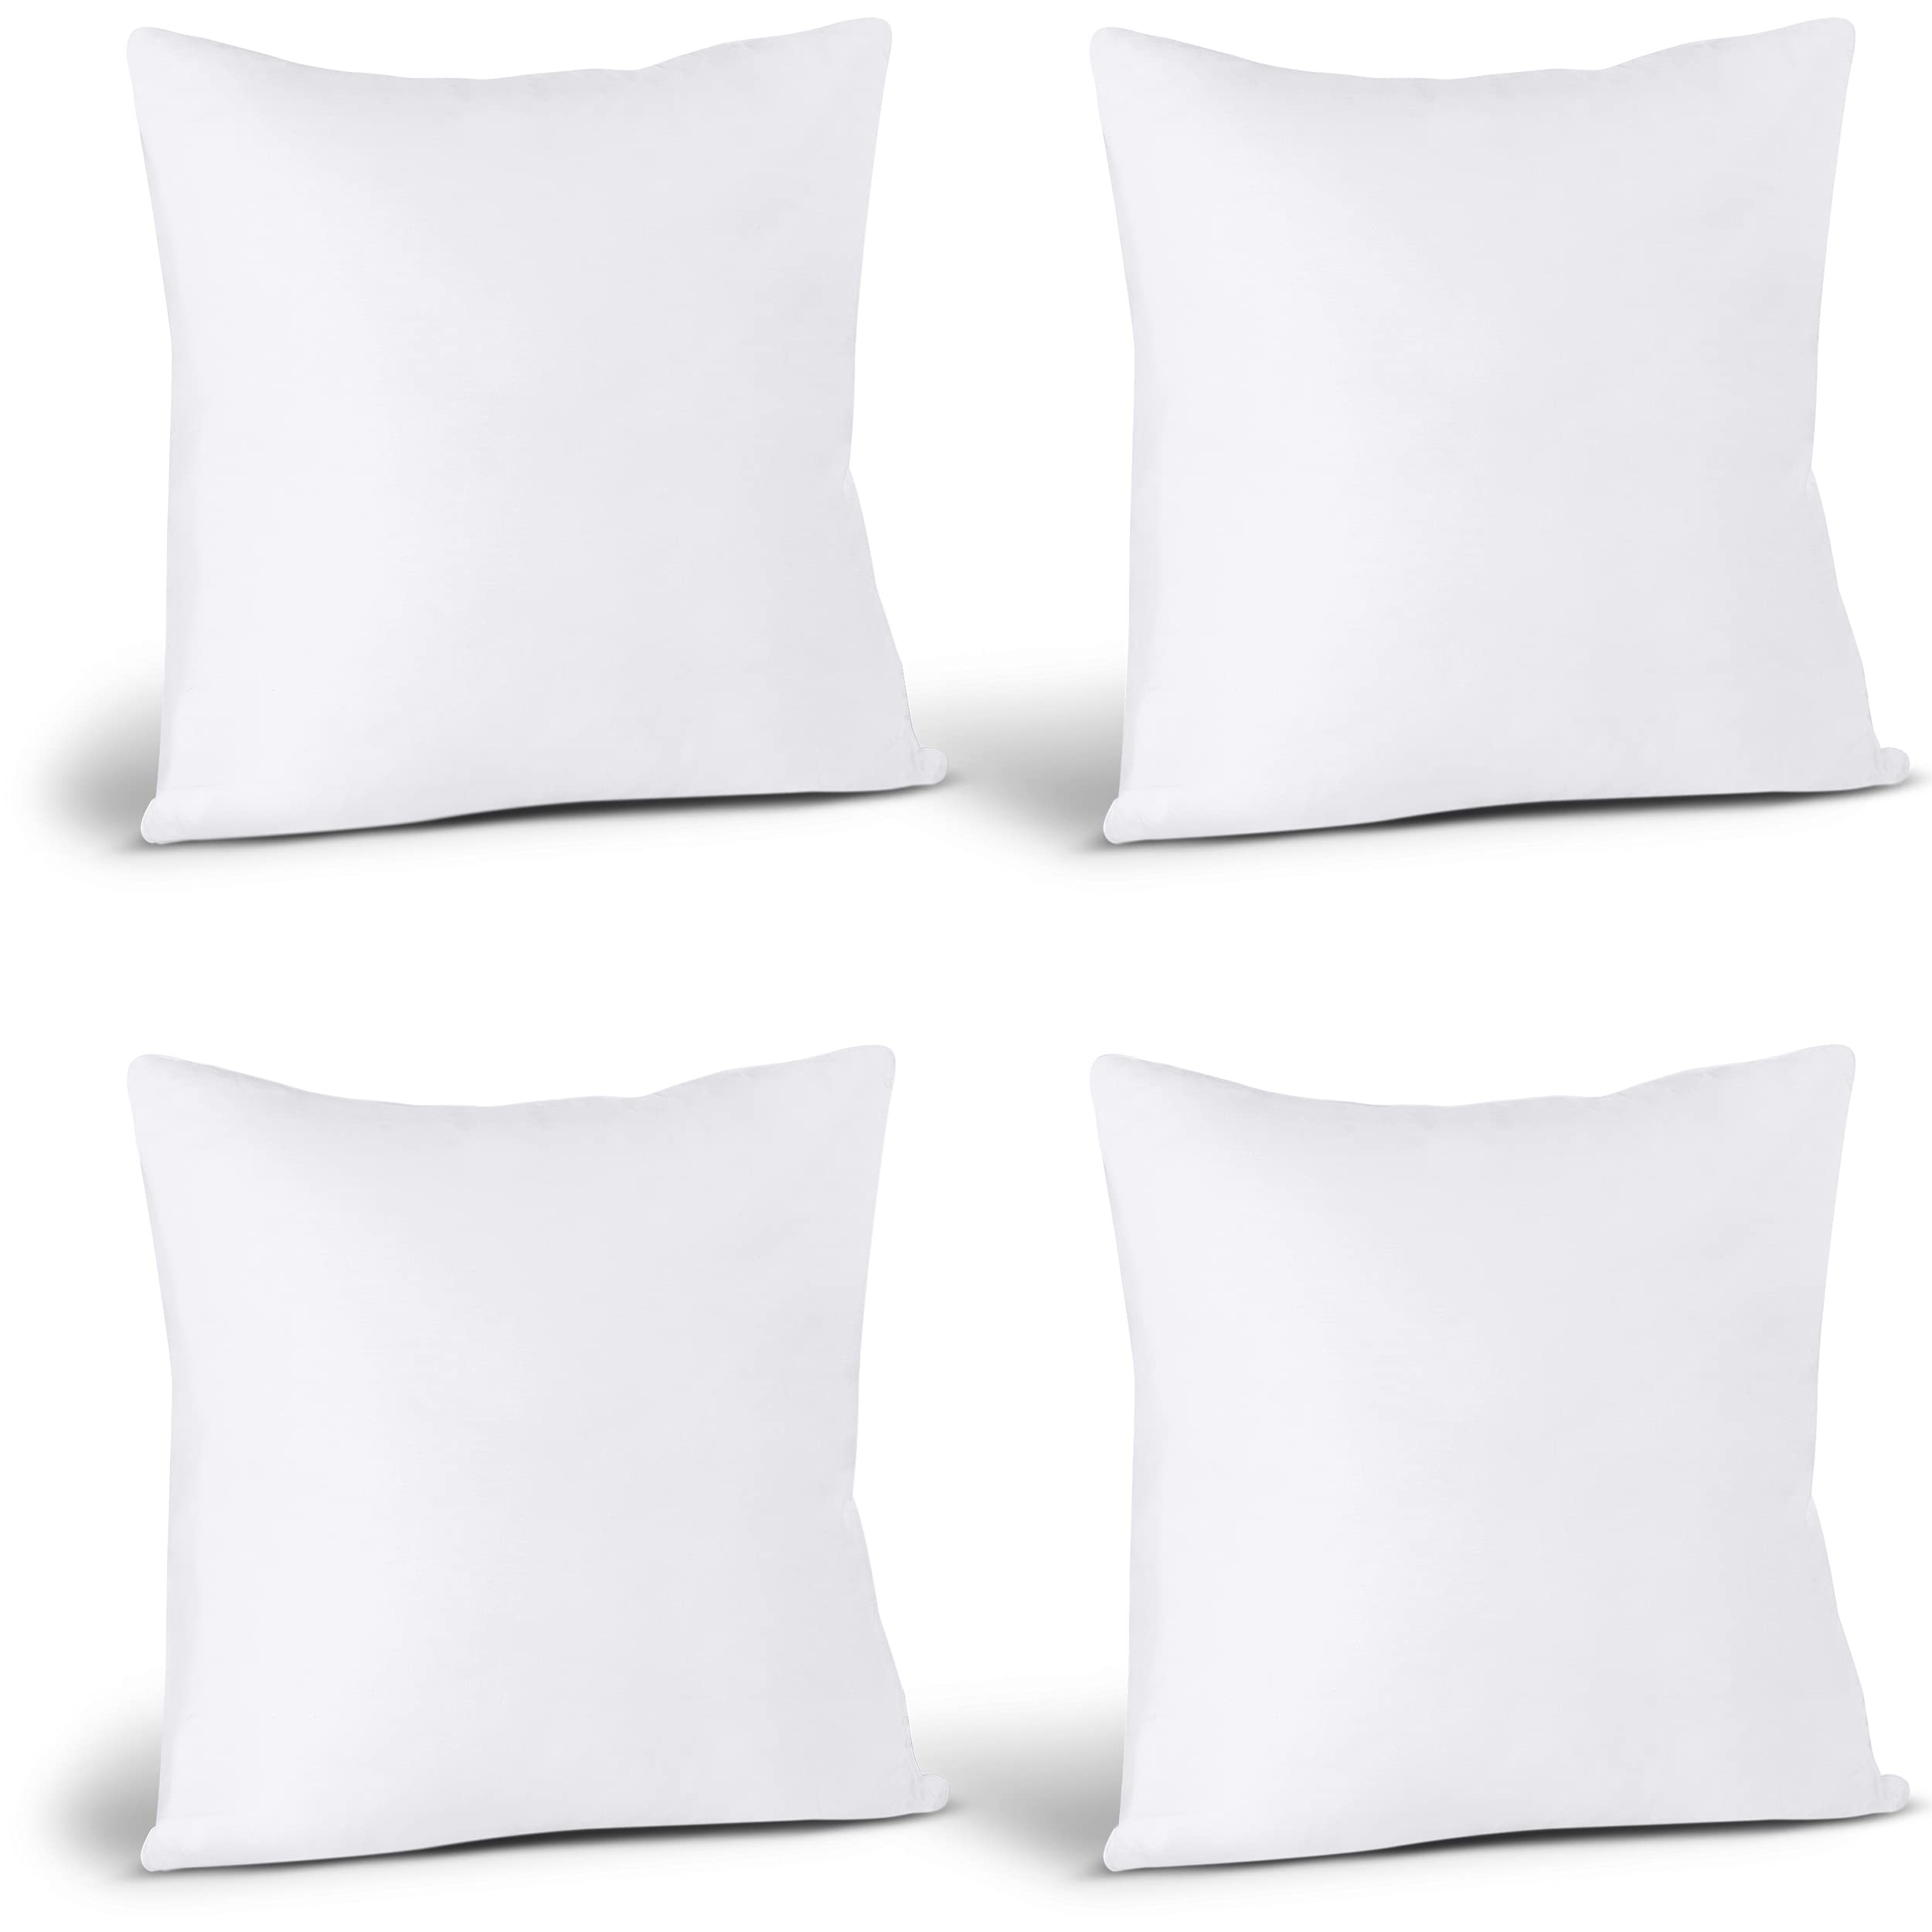 Find the perfect pillows decorative for the couch to match your decor